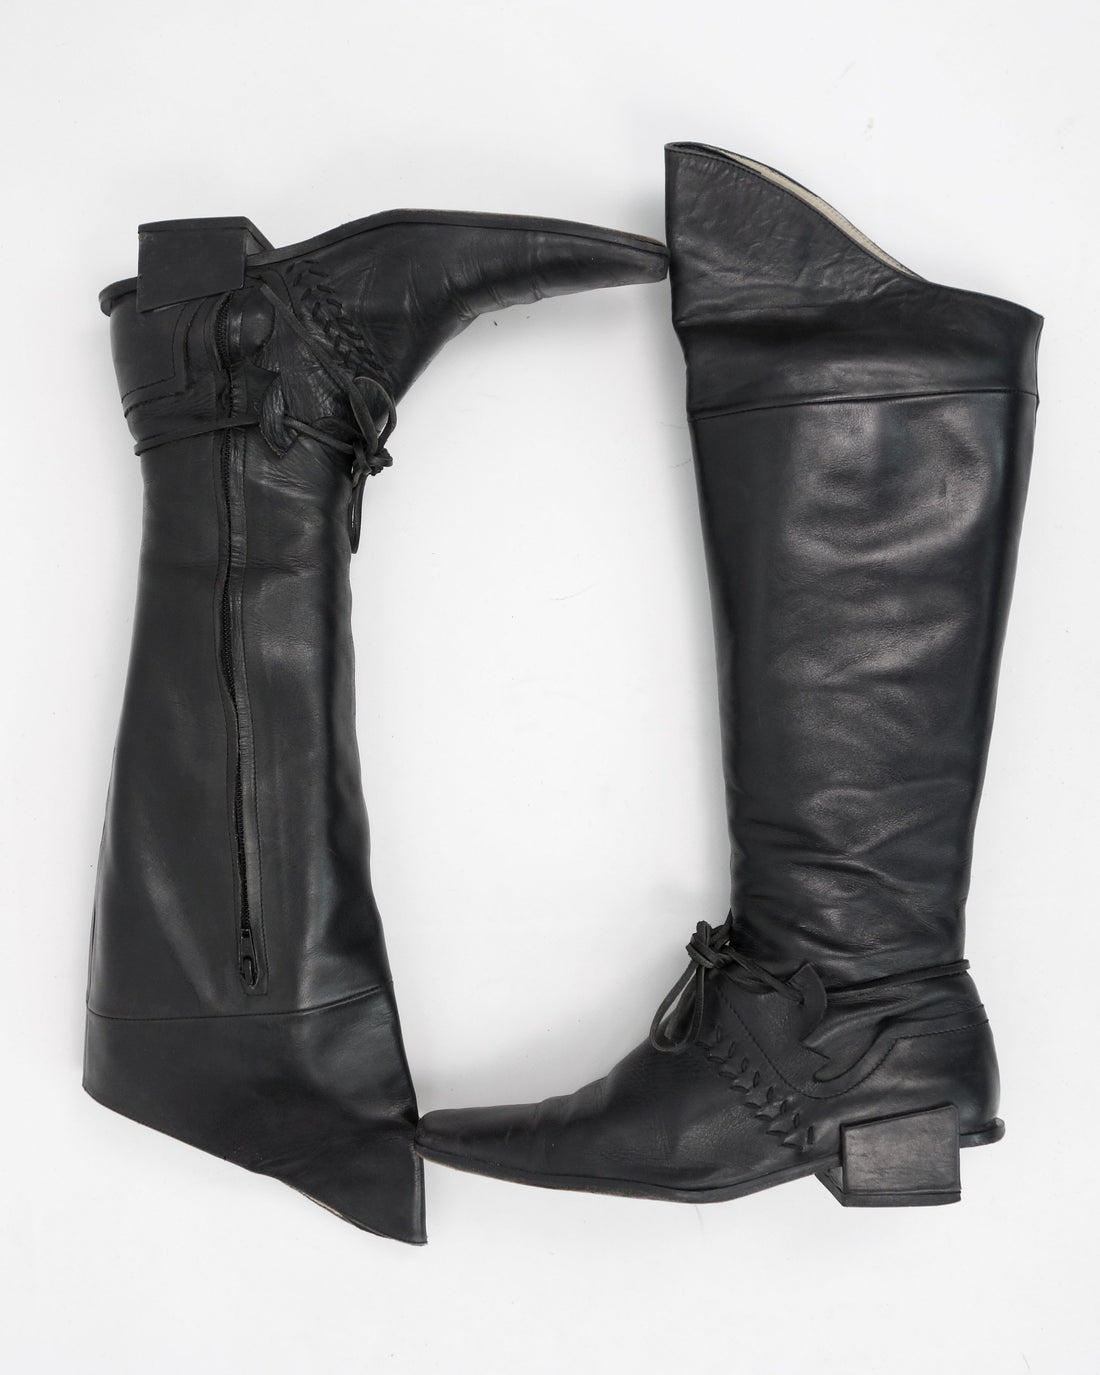 Marithé Francois Girbaud Laced High Leather Boots 1990's